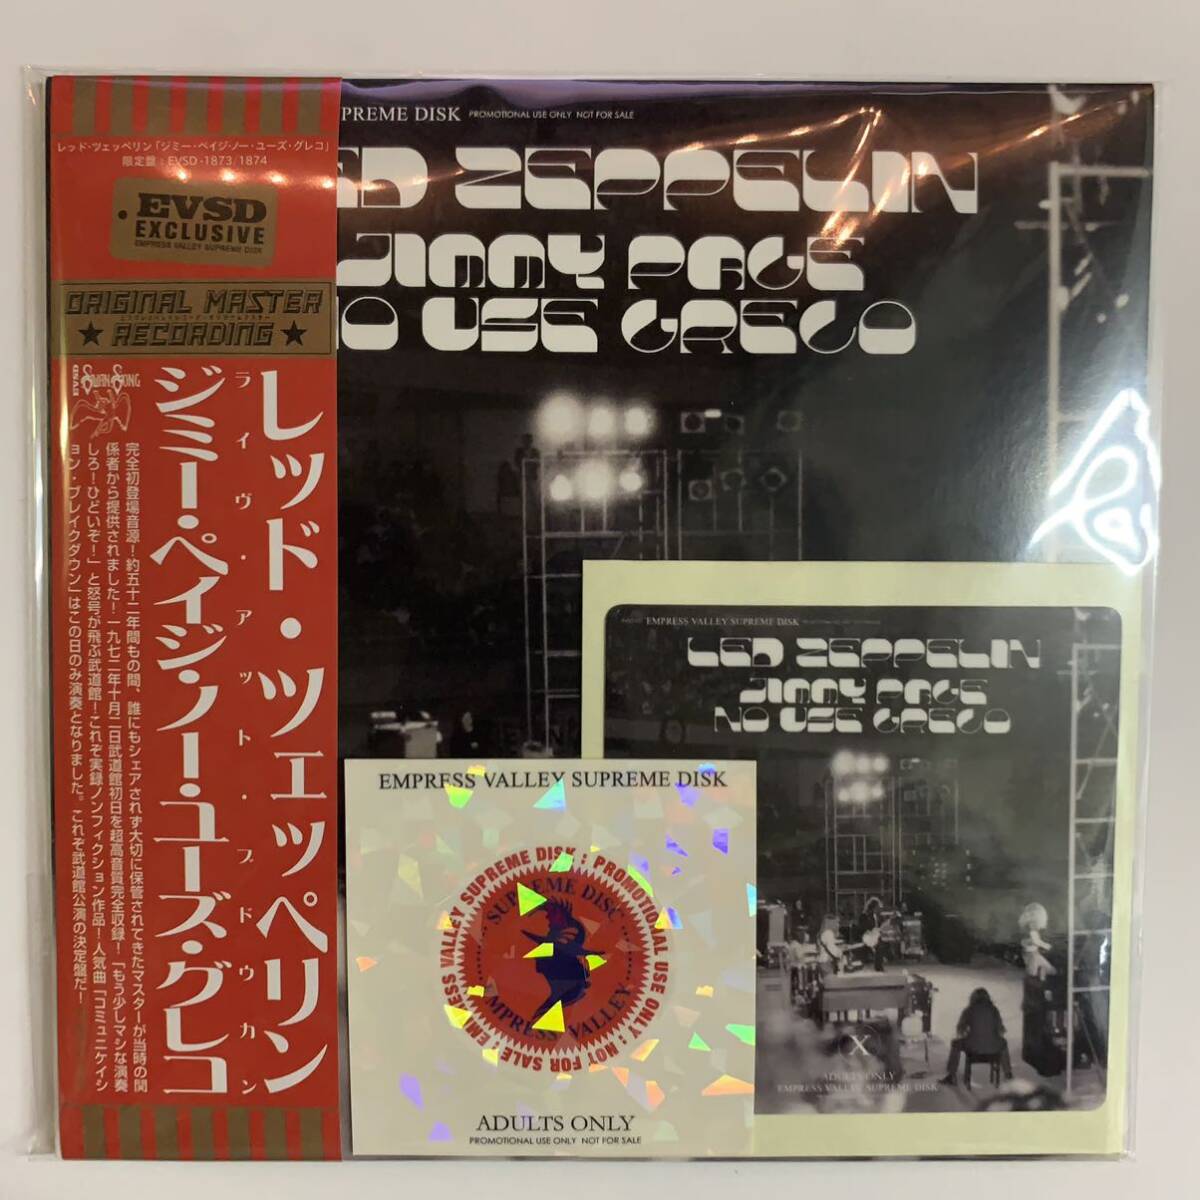 LED ZEPPELIN / JIMMY PAGE NO USE GRECO (2CD) 1972年10月2日武道館公演の間違いなく決定盤！素晴らしい高音質で話題沸騰中のアイテム！の画像1